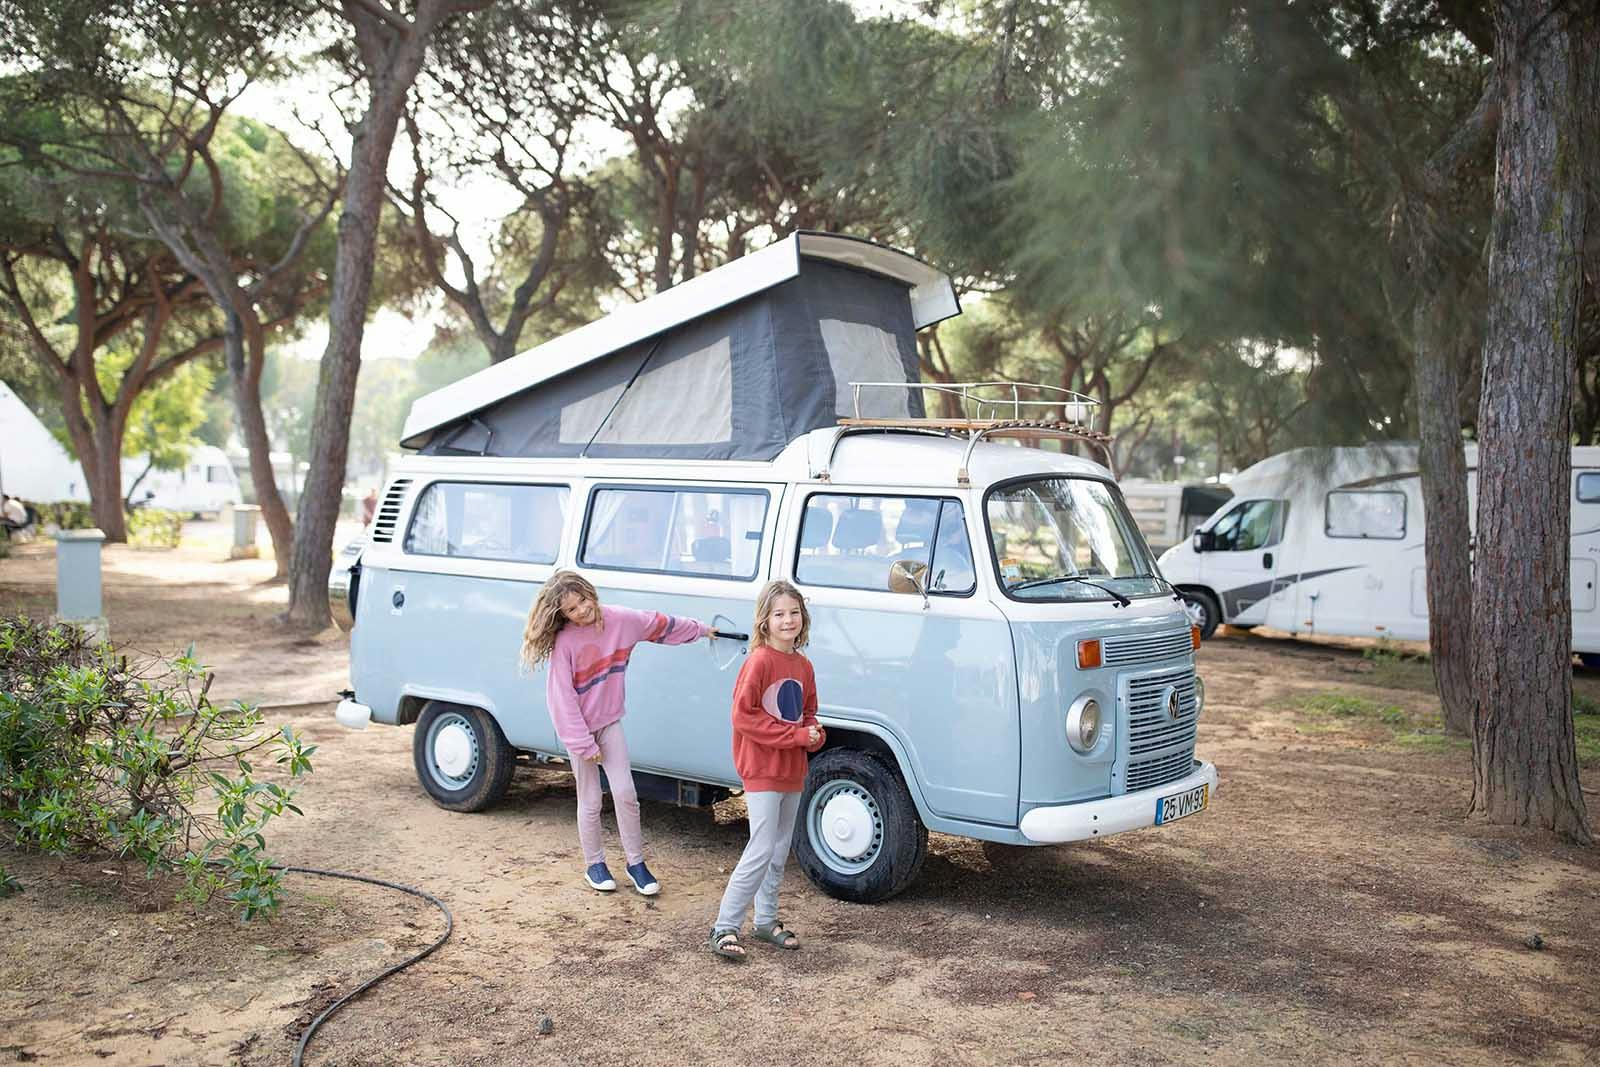 Lisbon provides an abundance of family-friendly camping options in and around the city